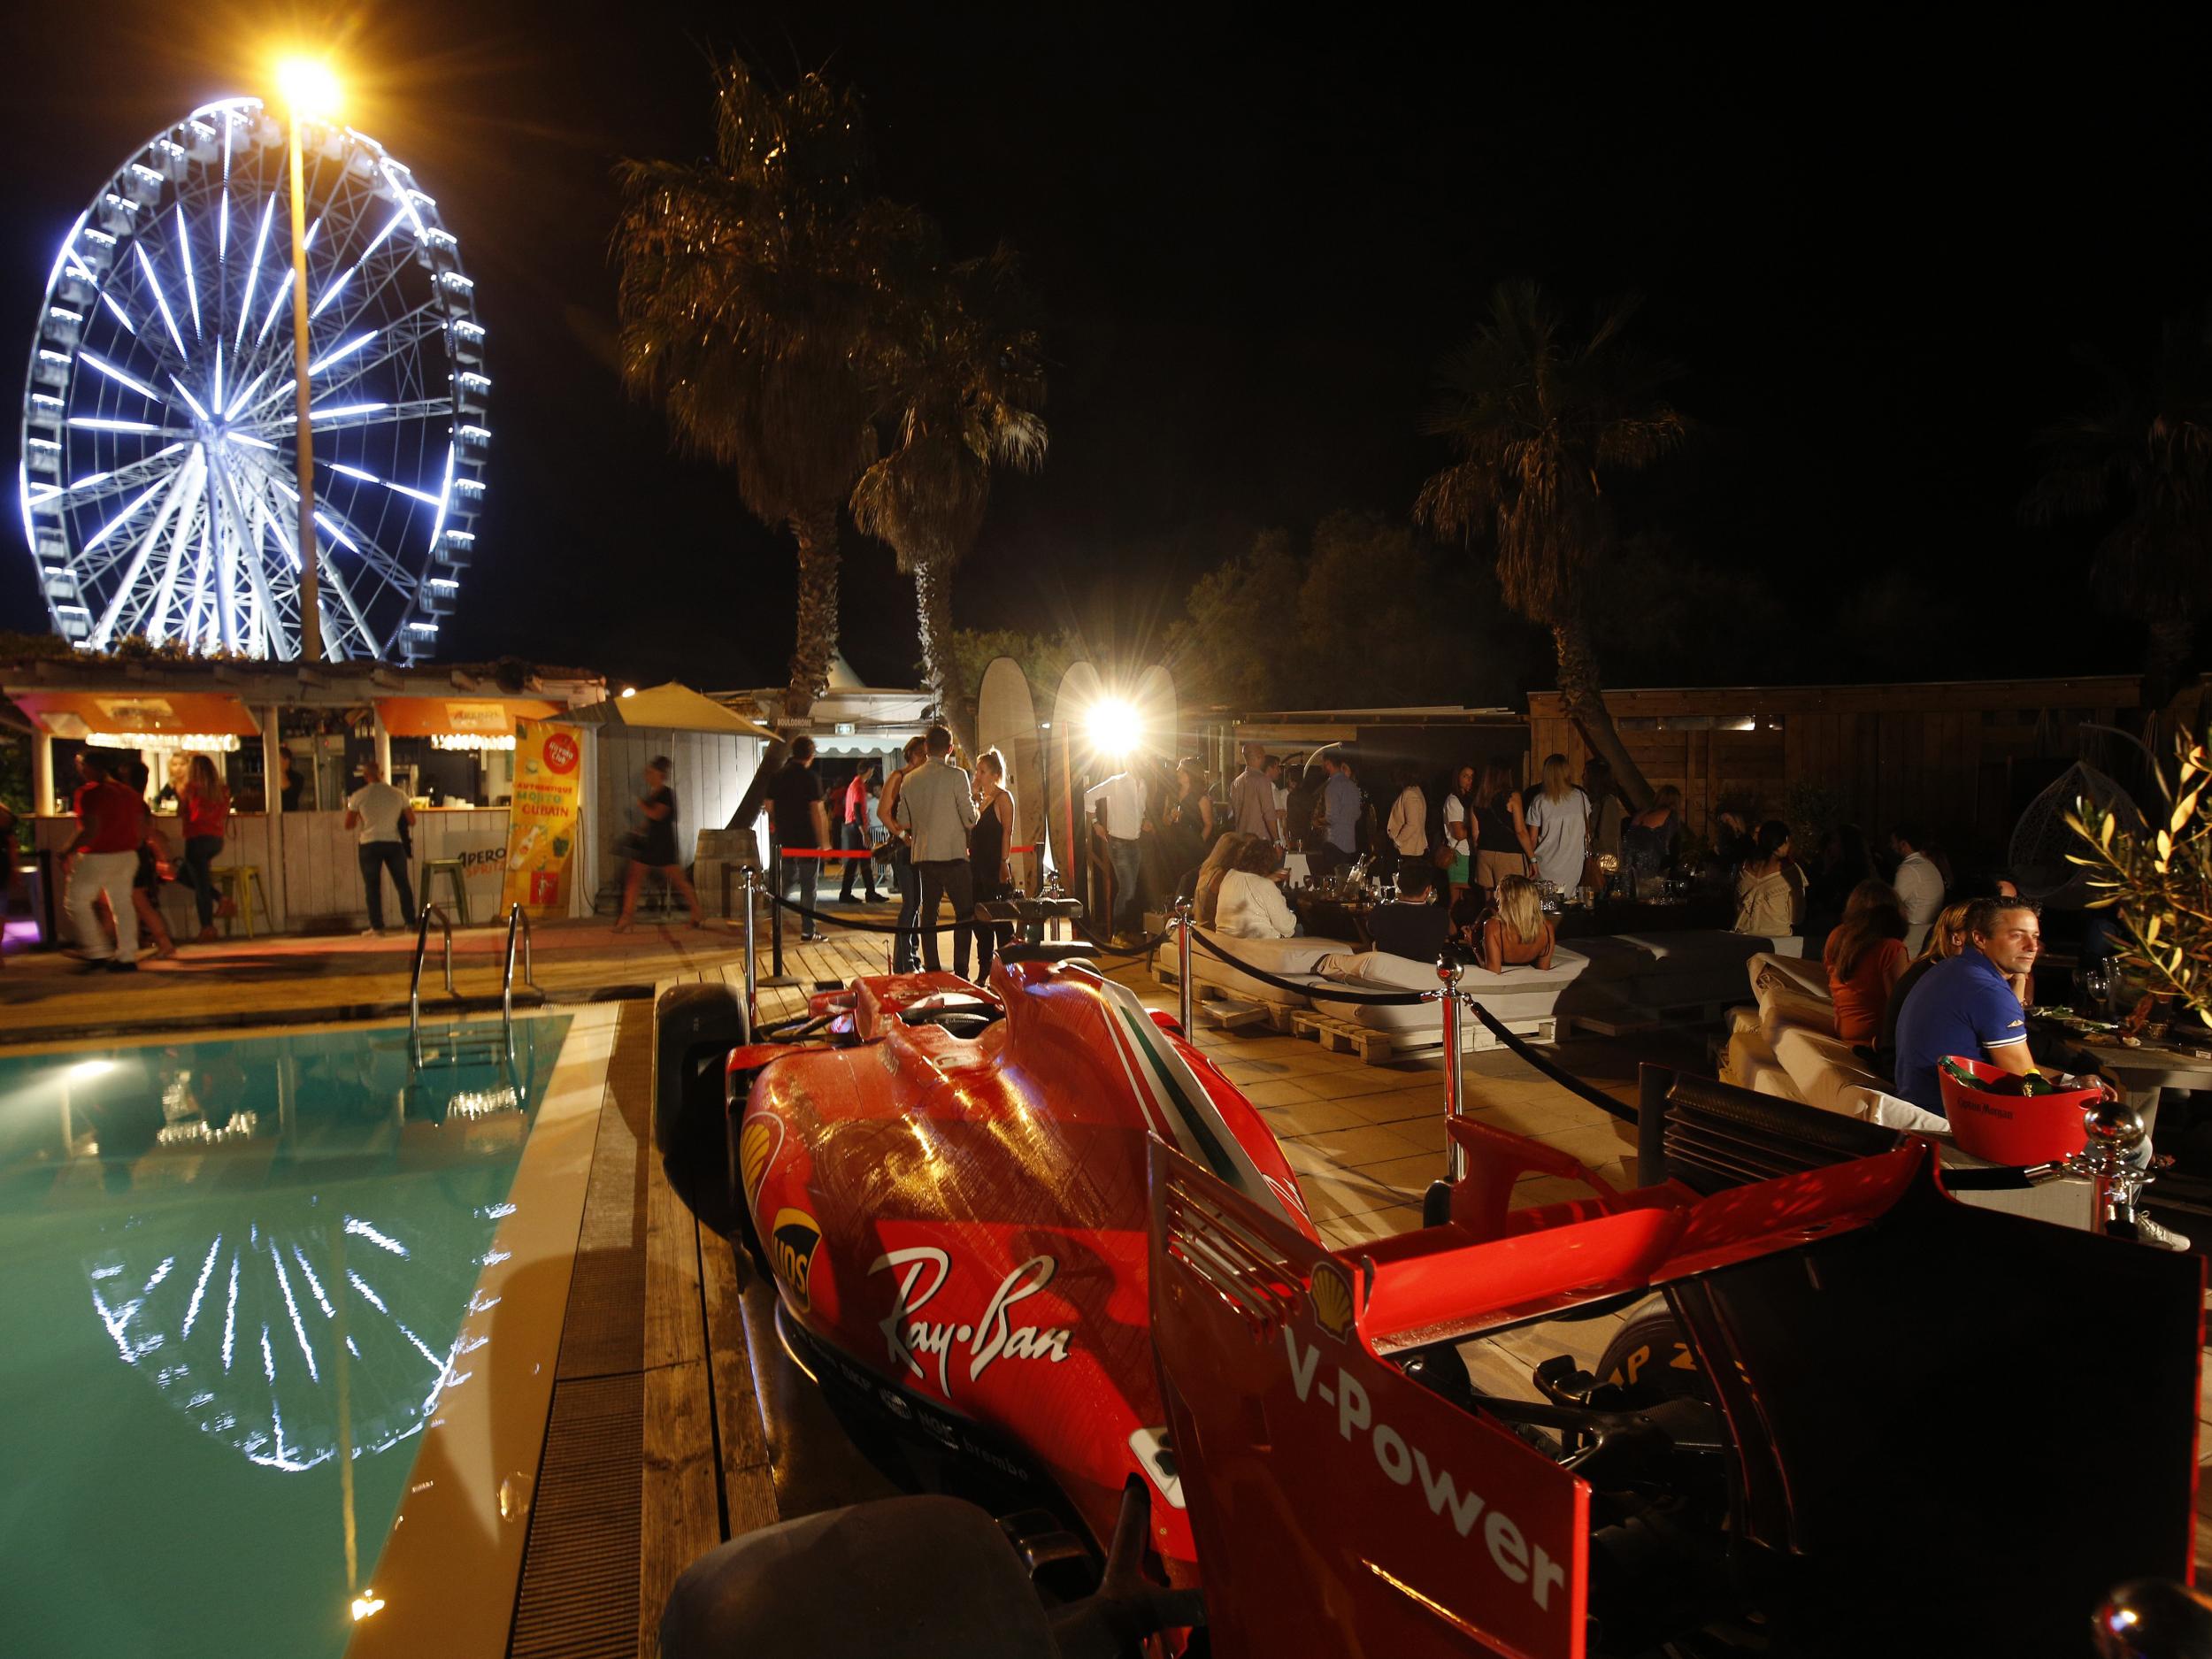 There was an F1 festival in Marseilles ahead of the French Grand Prix in 2018